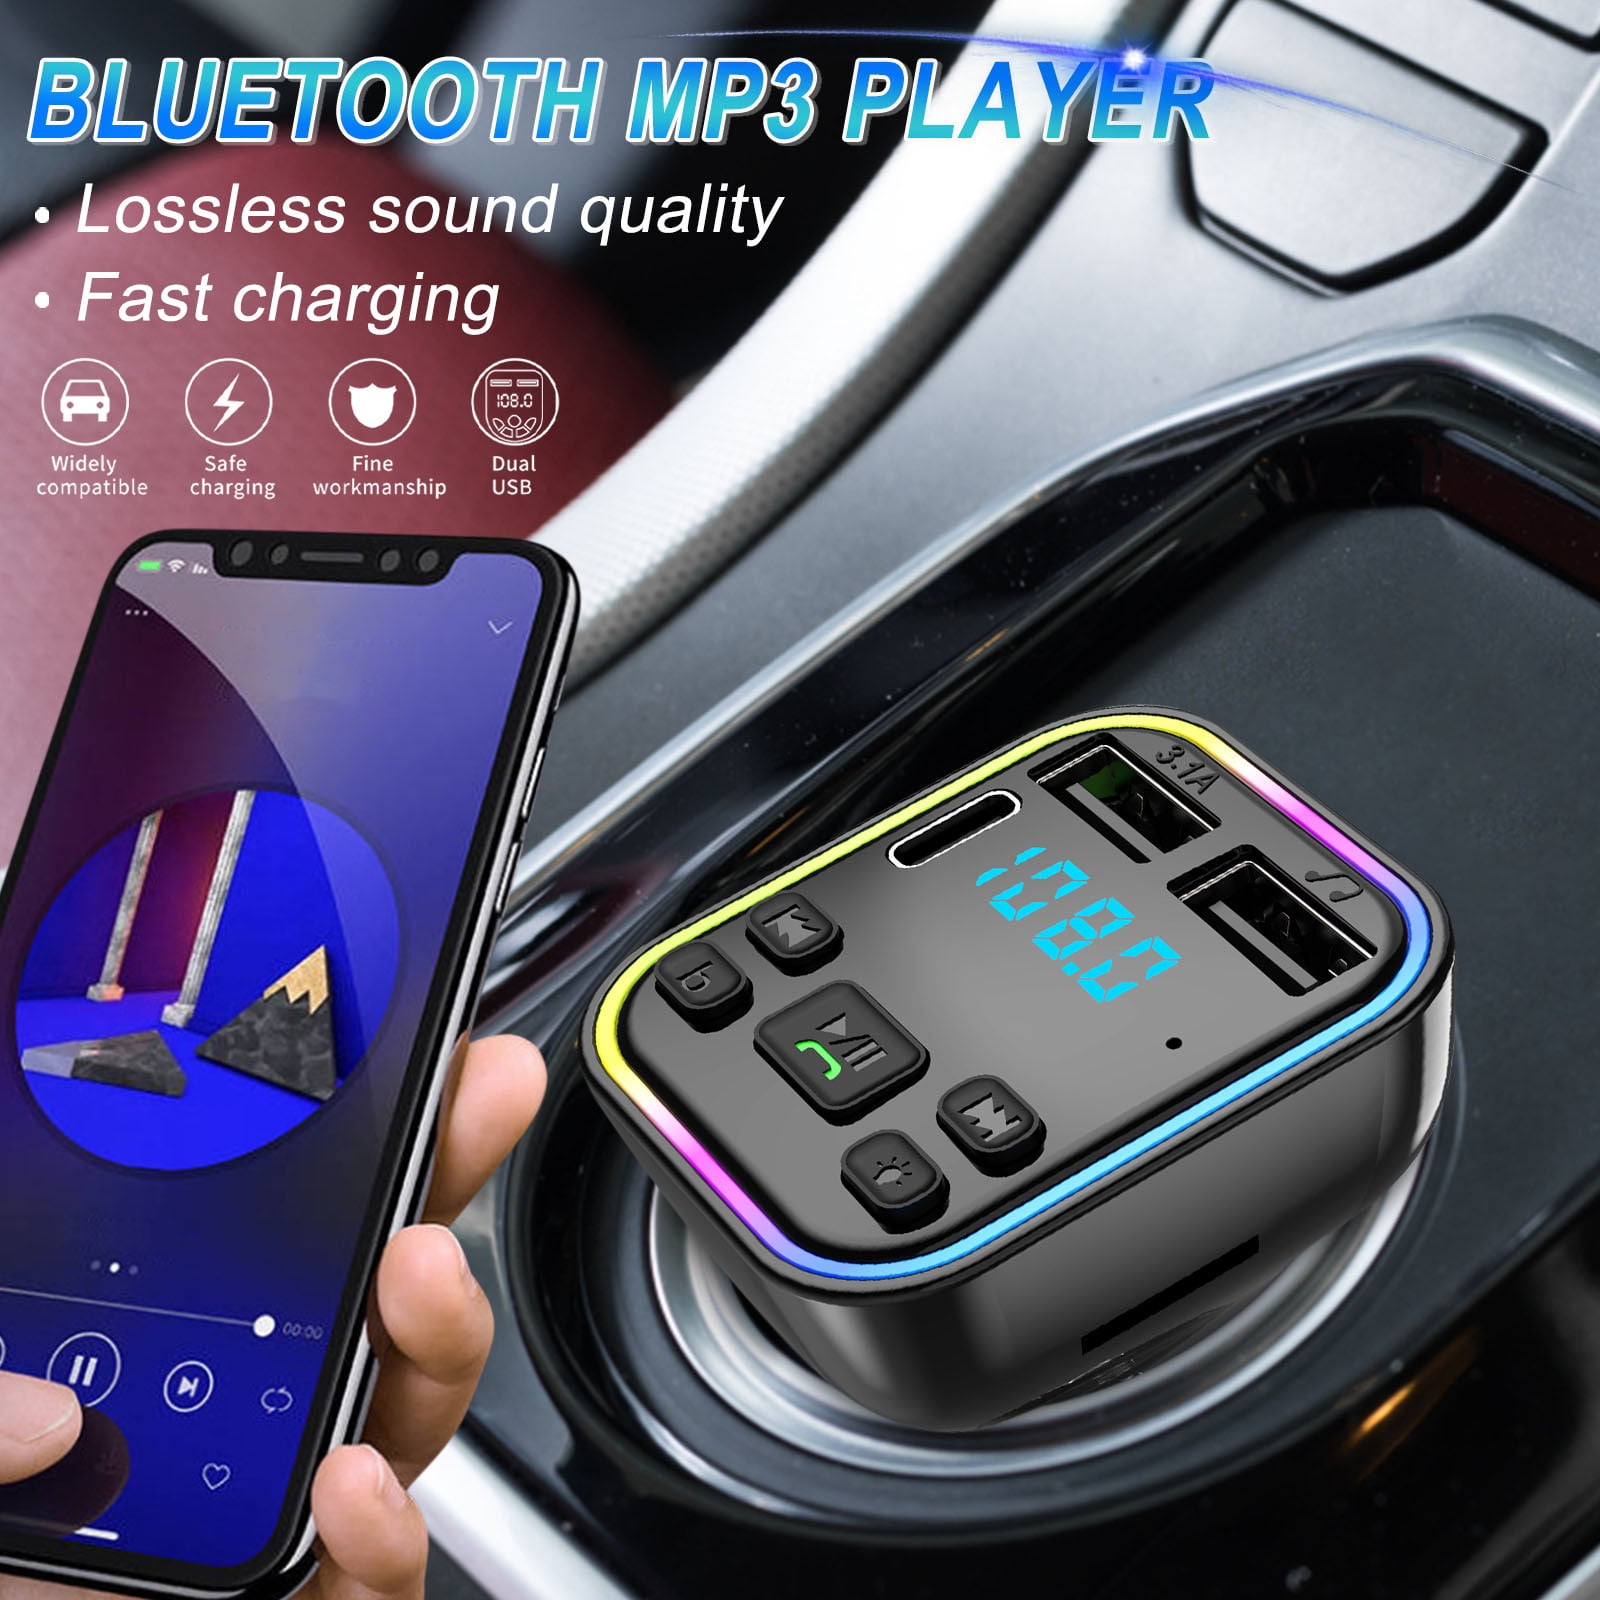 Armor All Bluetooth FM Transmitter, Receive Hands-Free Phone Calls,  Features 2 USB Ports For Charging Devices, Universal DC Port 